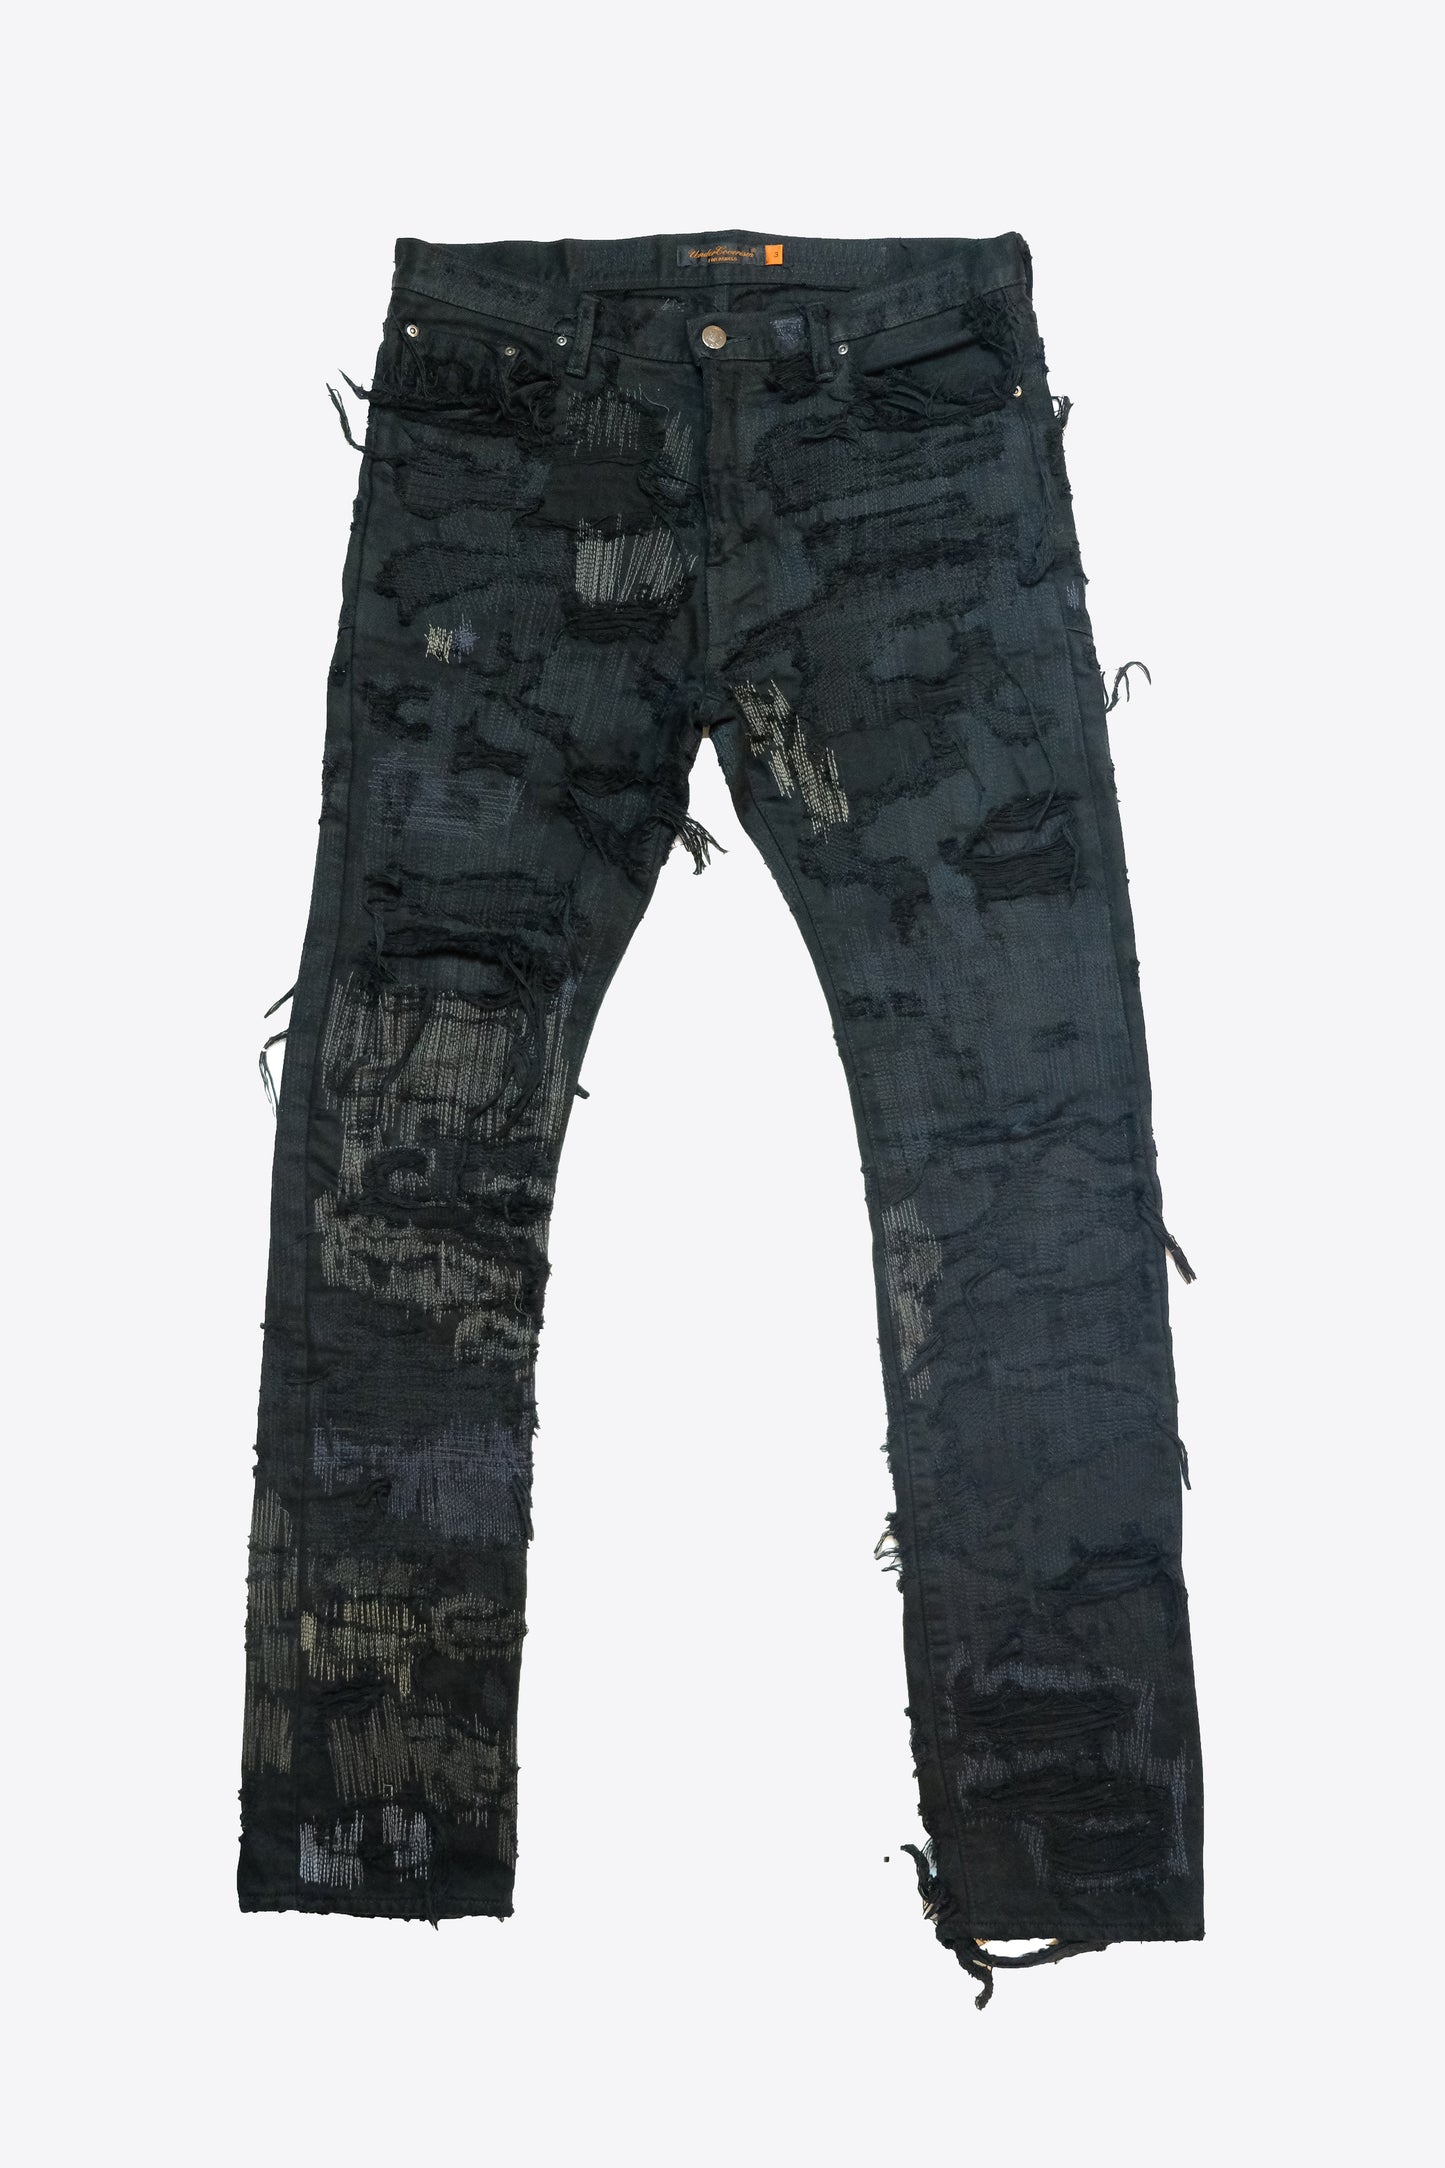 Undercover(ism) - AW05 "Arts and Crafts" 85 Denim Pants, JP 3